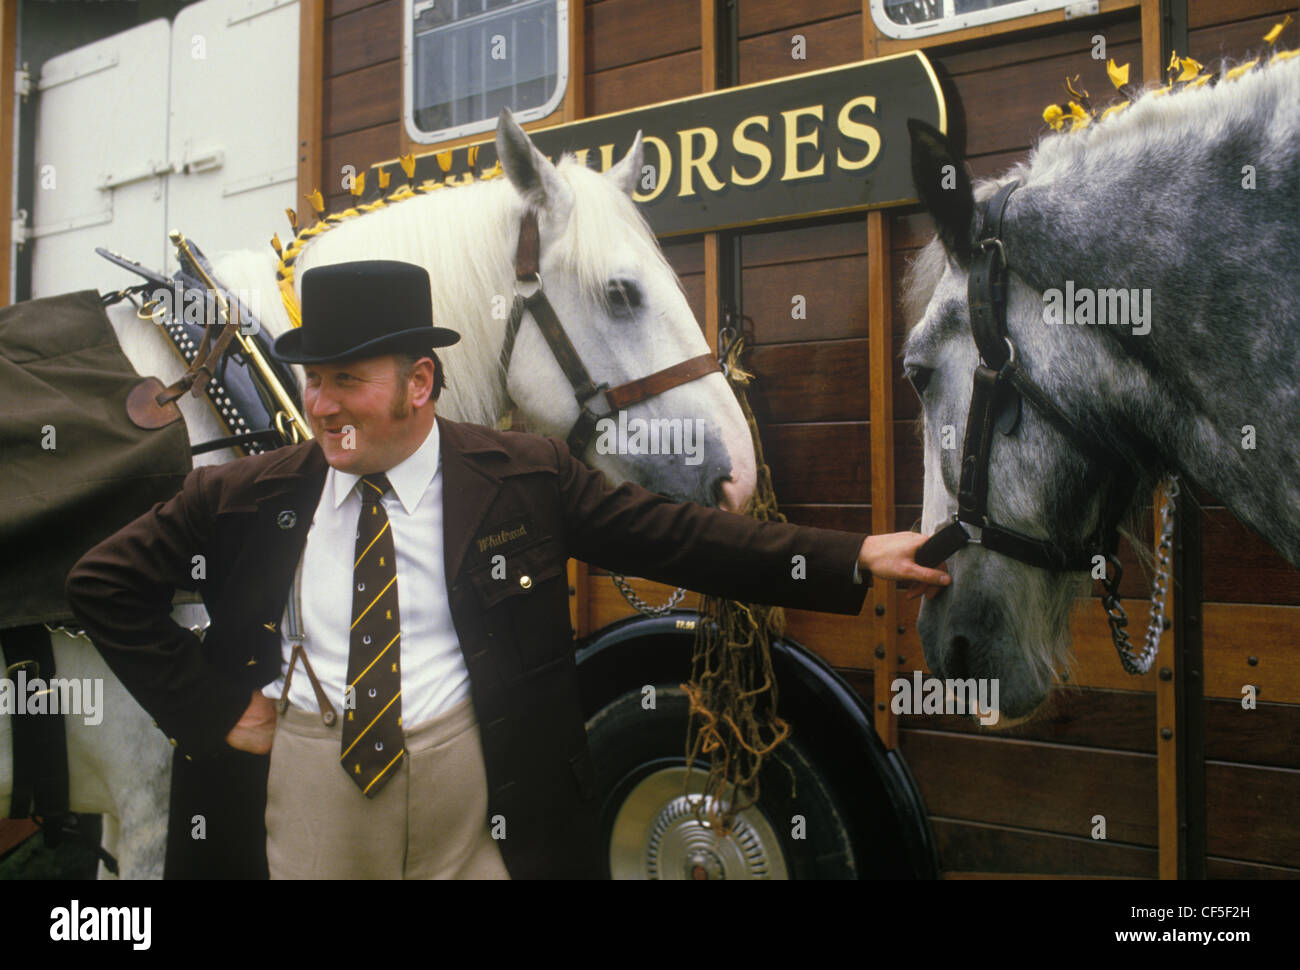 Heavy Horse Show. Brasserie Whitbread Dray horse driver. London UK. HOMER SYKES Banque D'Images